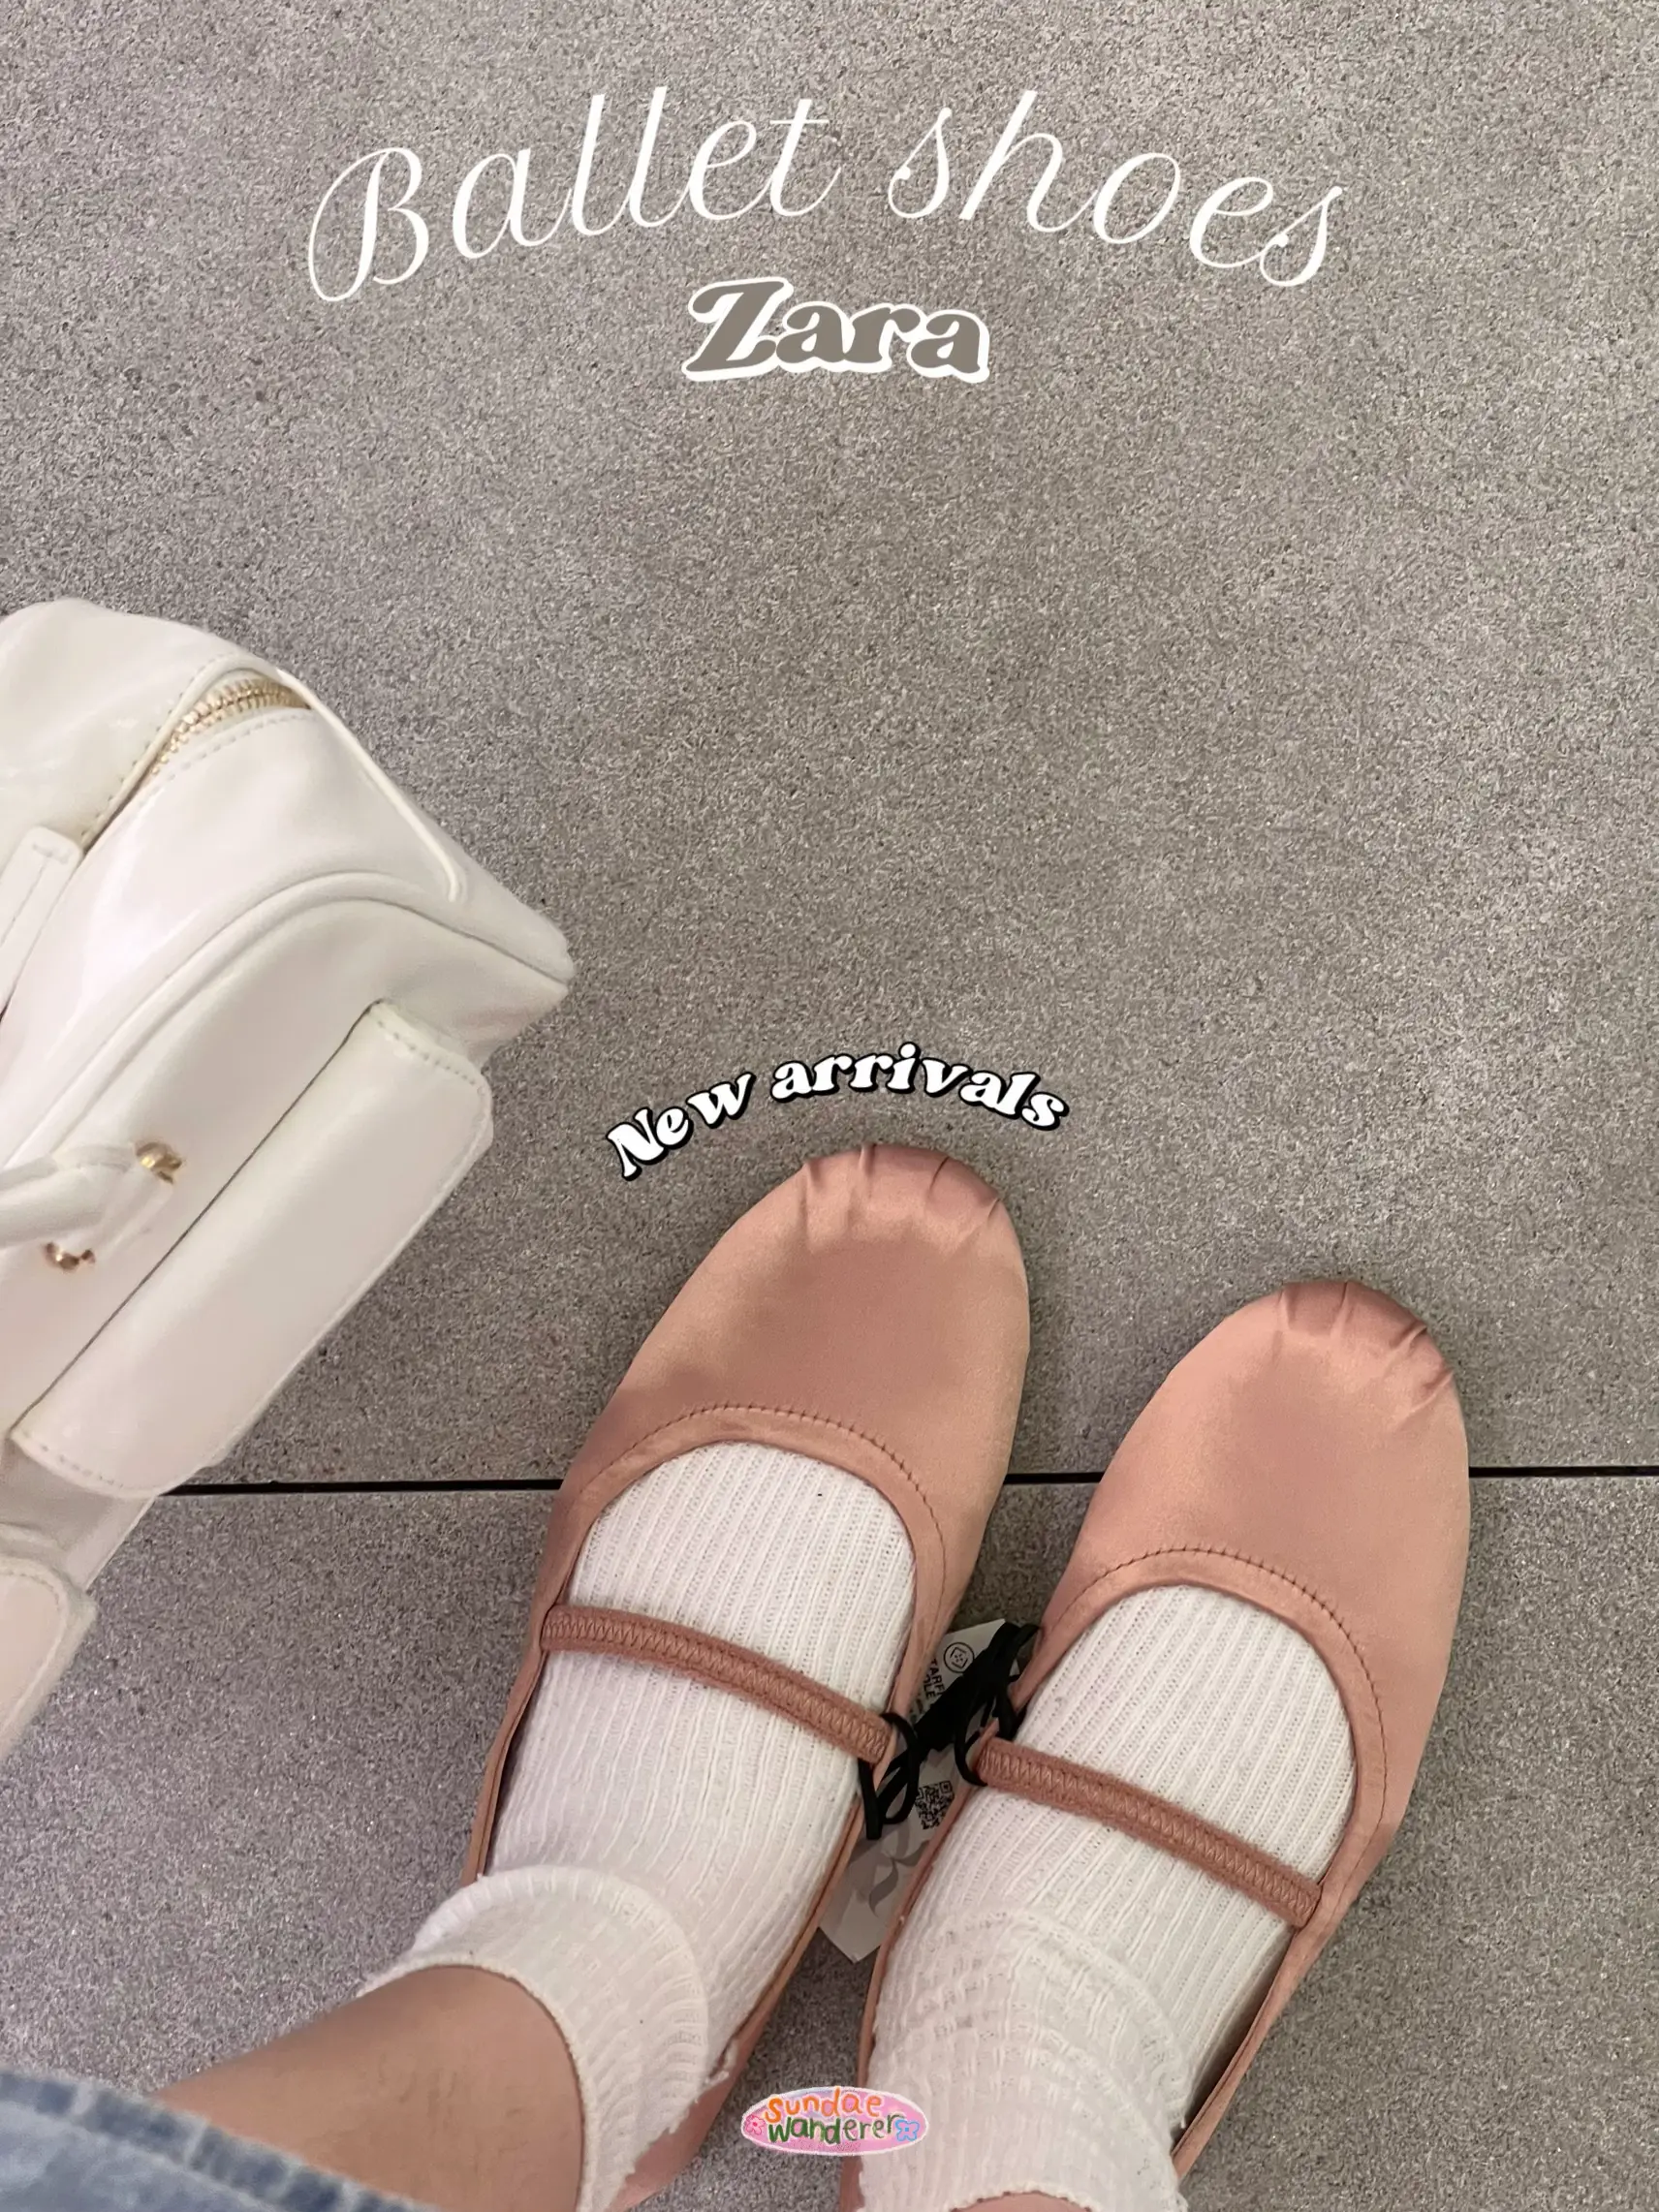 ZARA ballet shoes can't be cute        | Gallery posted by Sundae